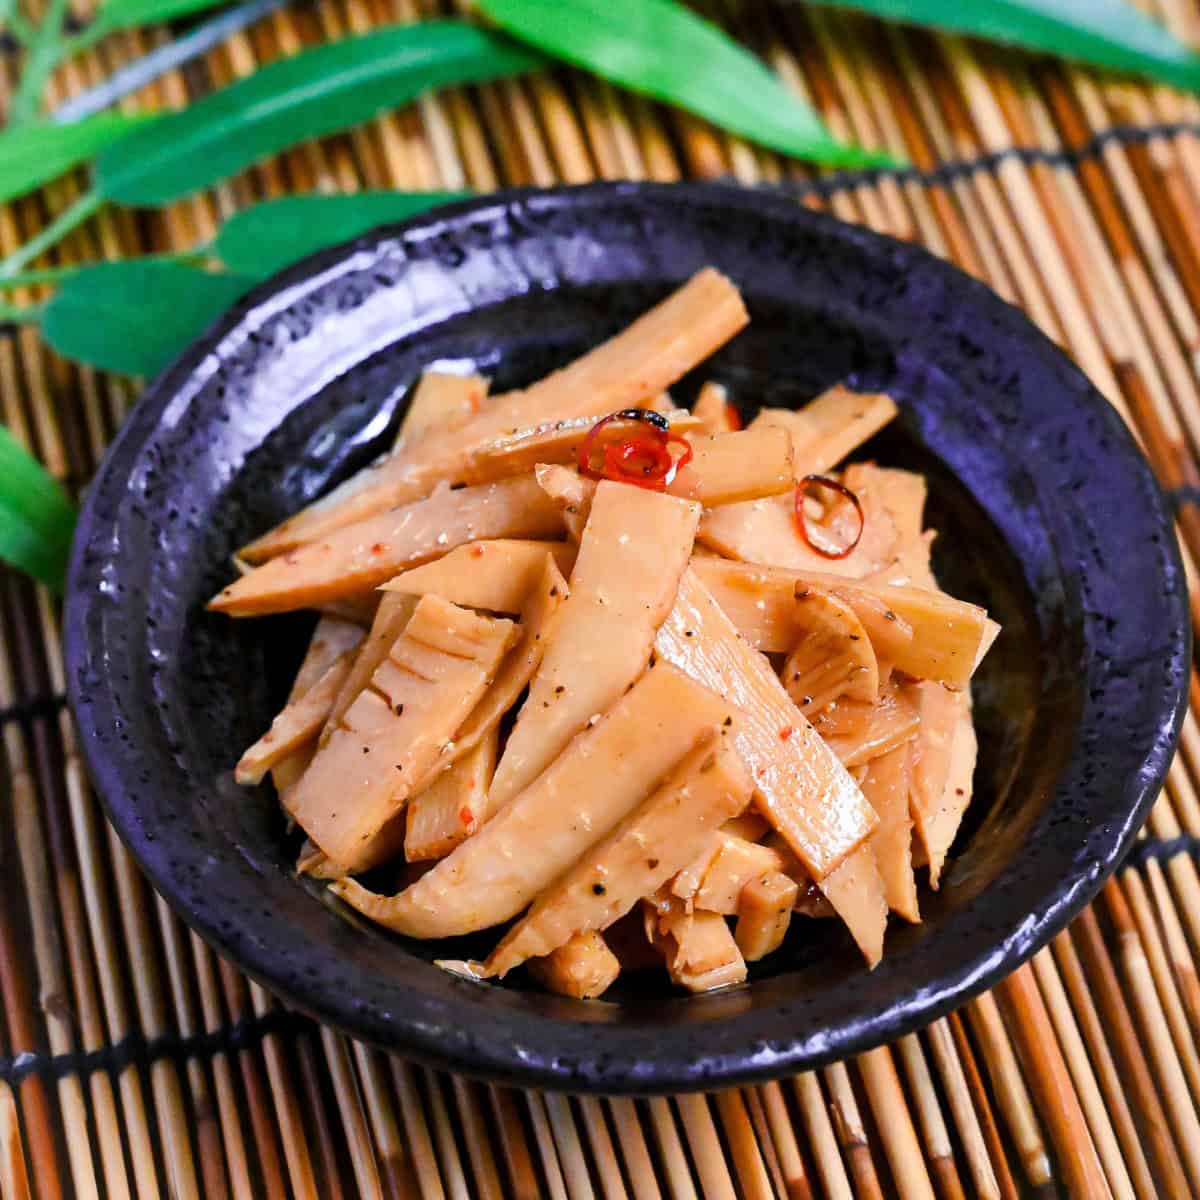 Menma-style seasoned bamboo shoots ramen topping in a black bowl on a bamboo background